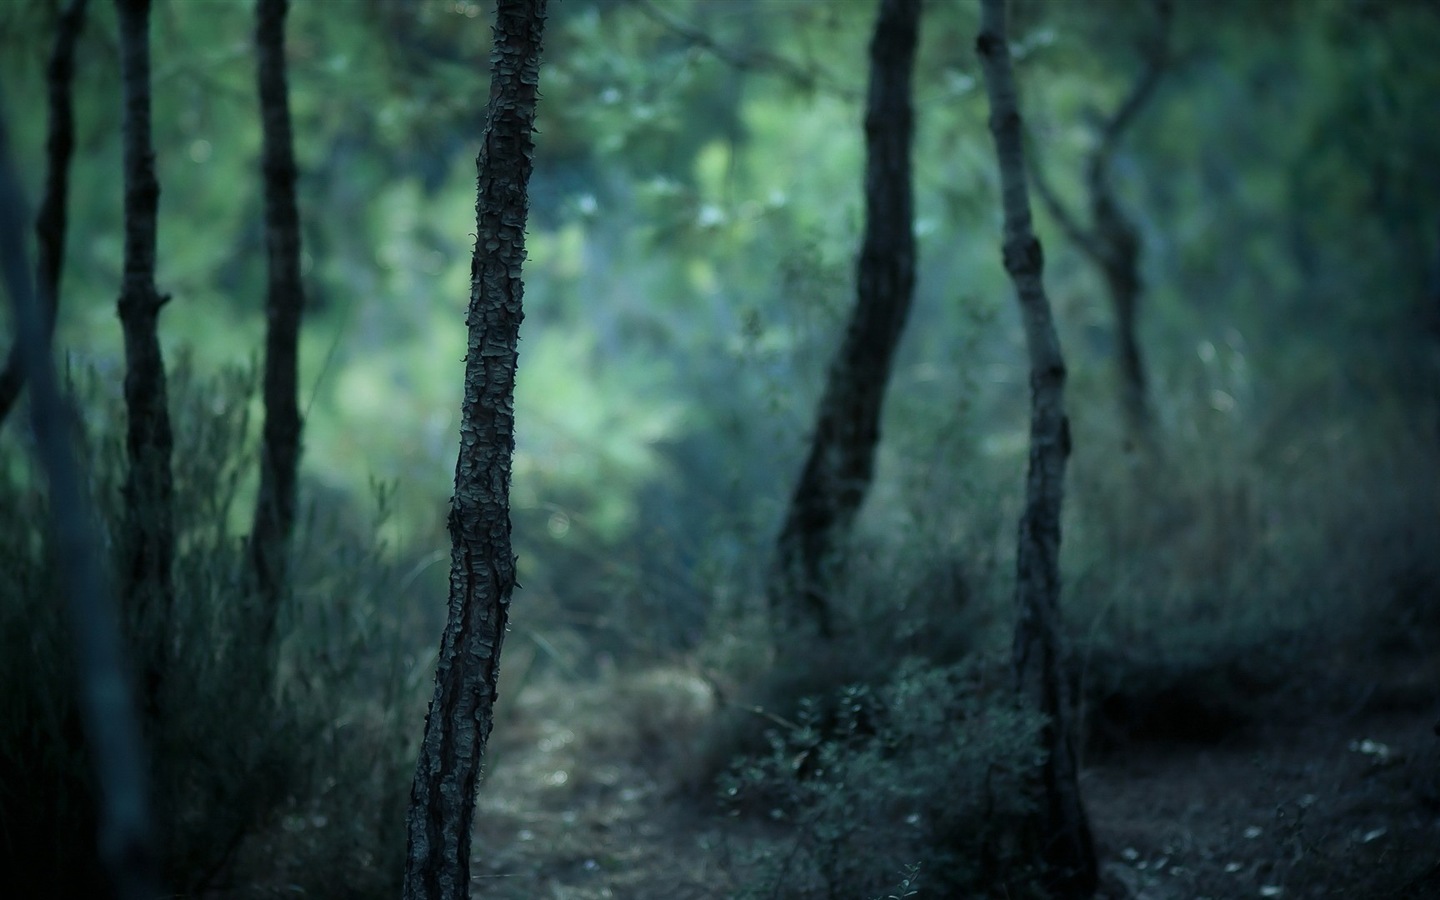 Windows 8 theme forest scenery HD wallpapers #7 - 1440x900